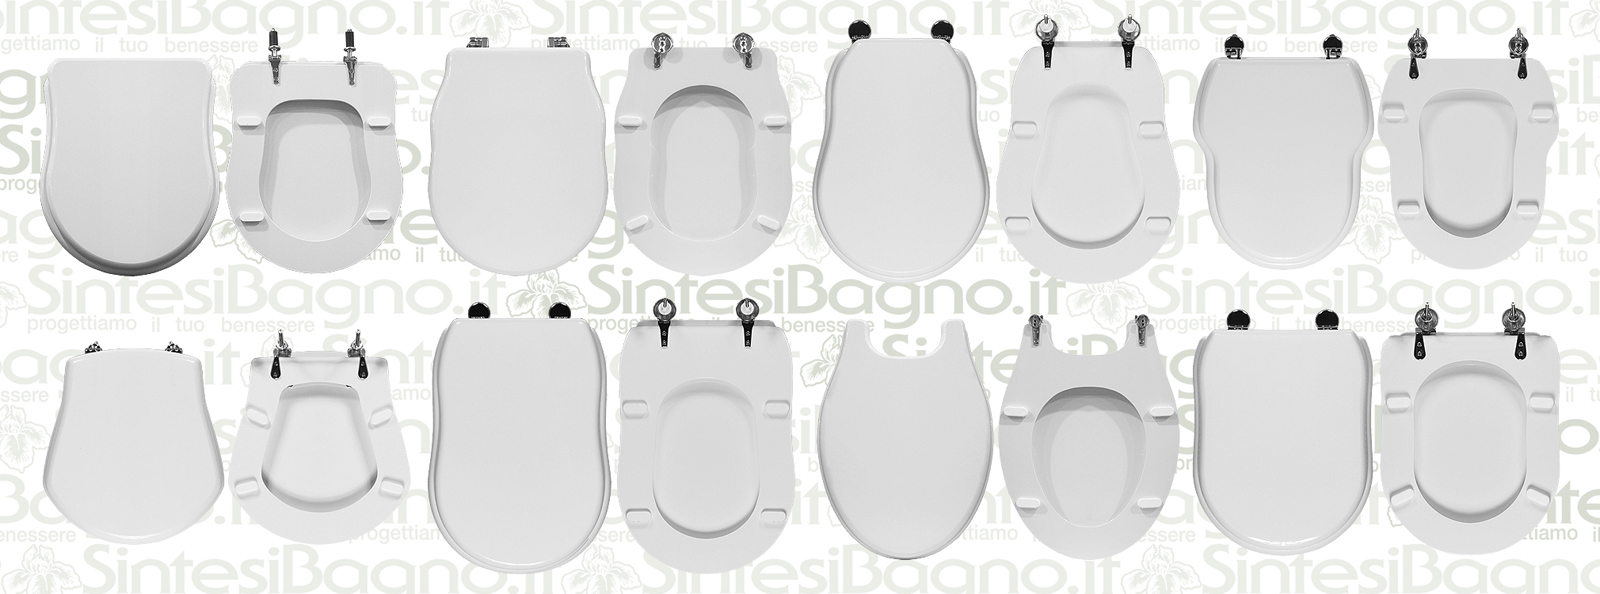 Sanitary ware with (artistically) shaped toilet seat covers